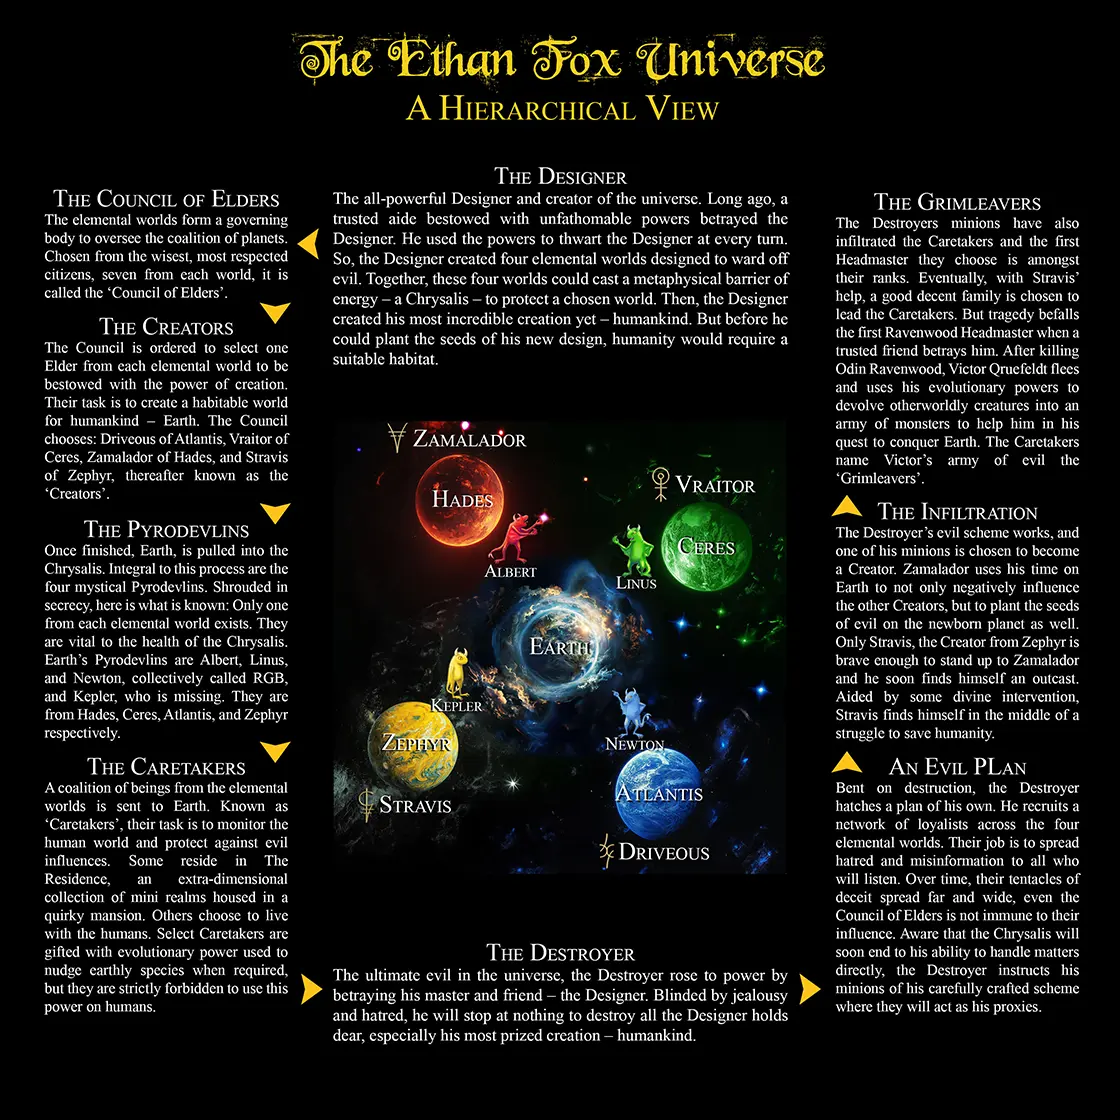 Hierarchical view of the Ethan Fox Universe with four elemental worlds around Earth in a chrysalis, plus descriptive text